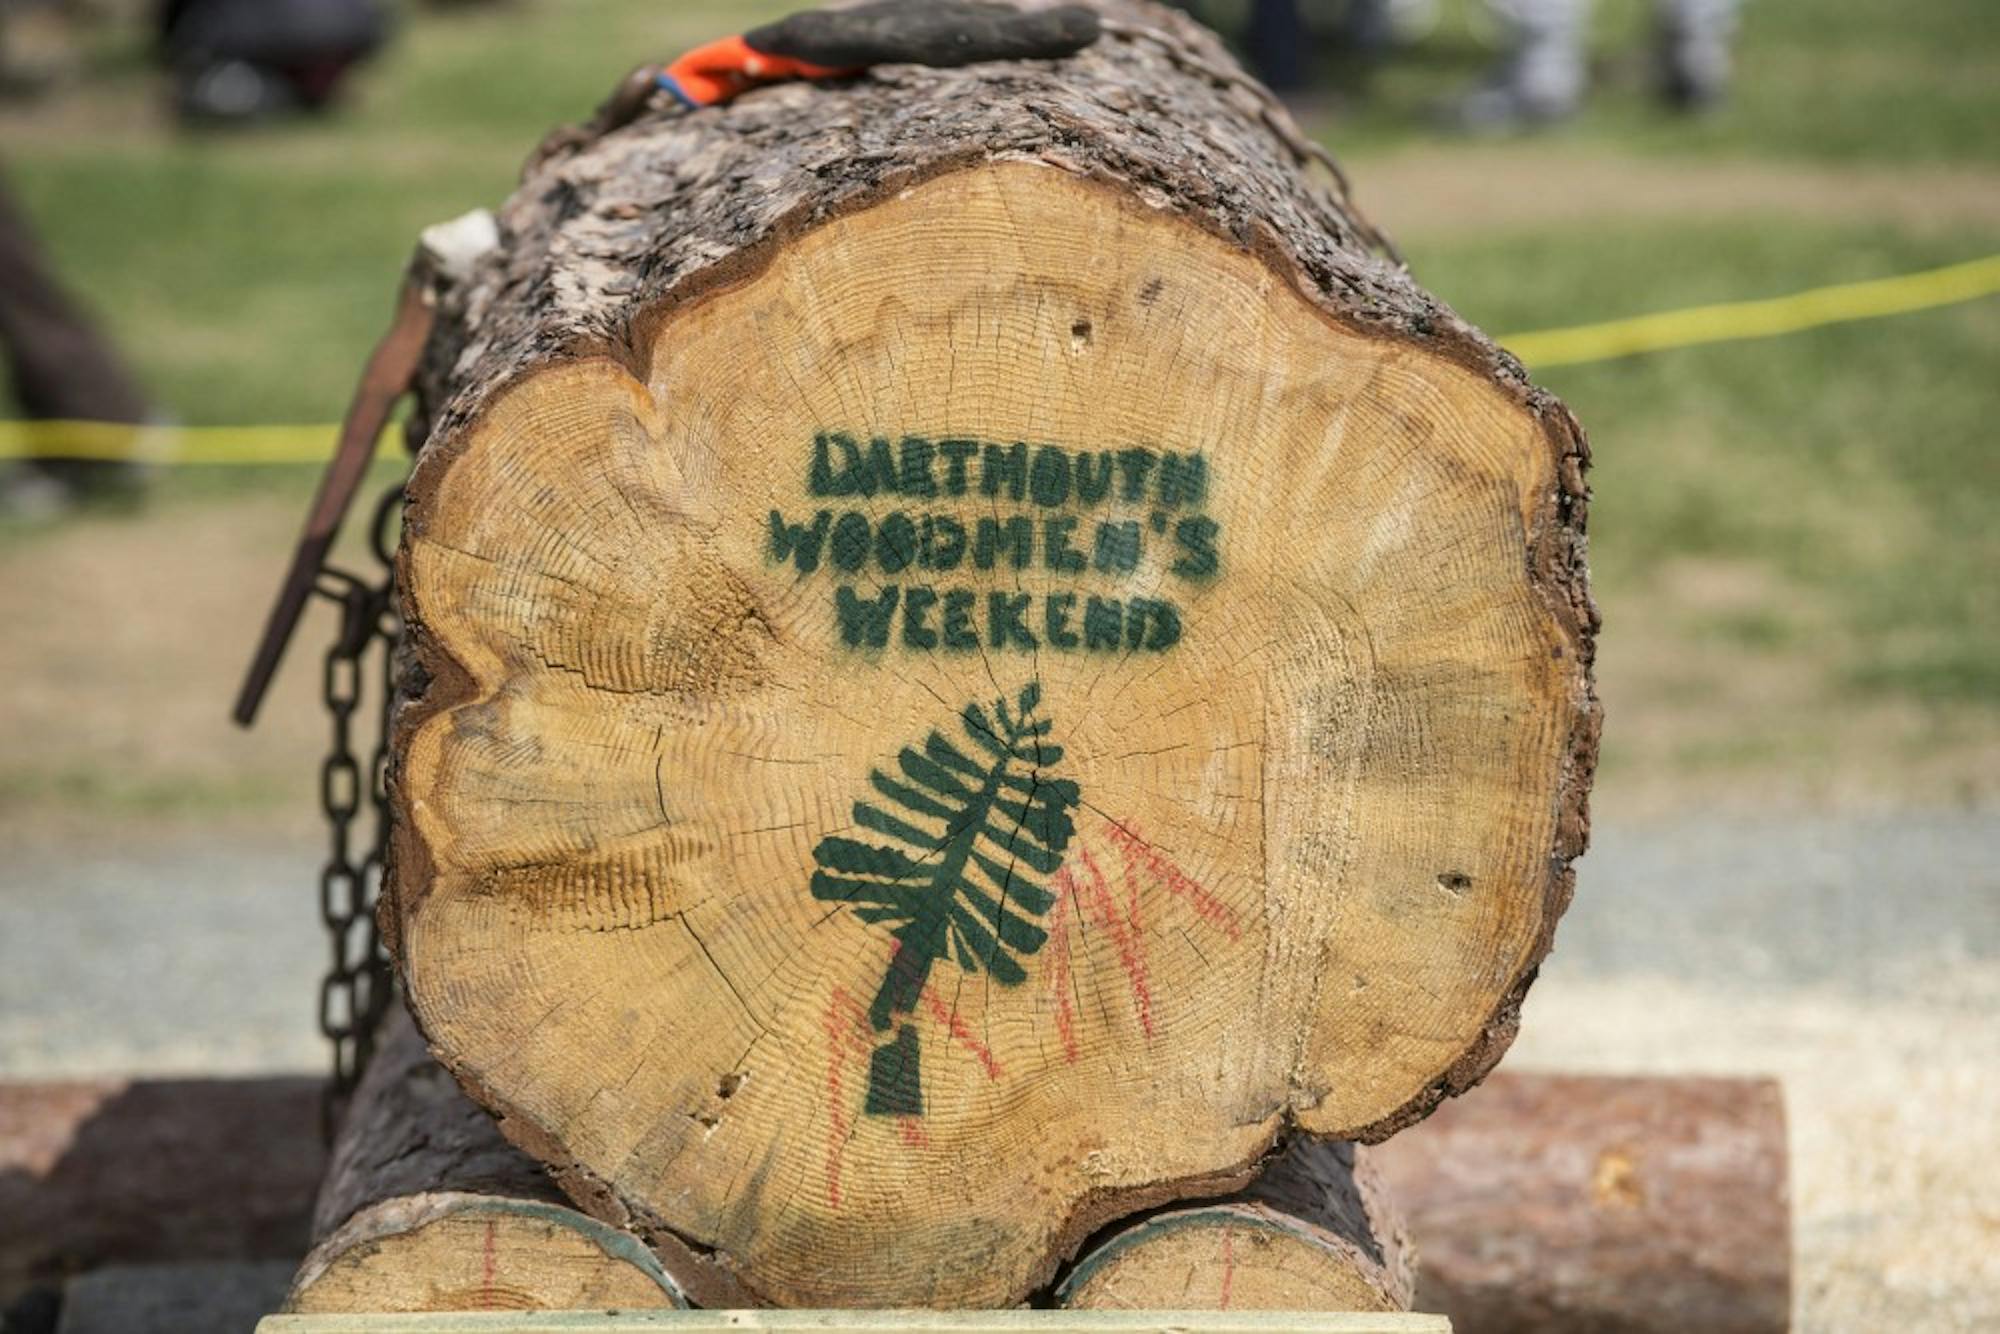 The Dartmouth Woodsmen's Team practices events such as axe throwing and wood splitting.